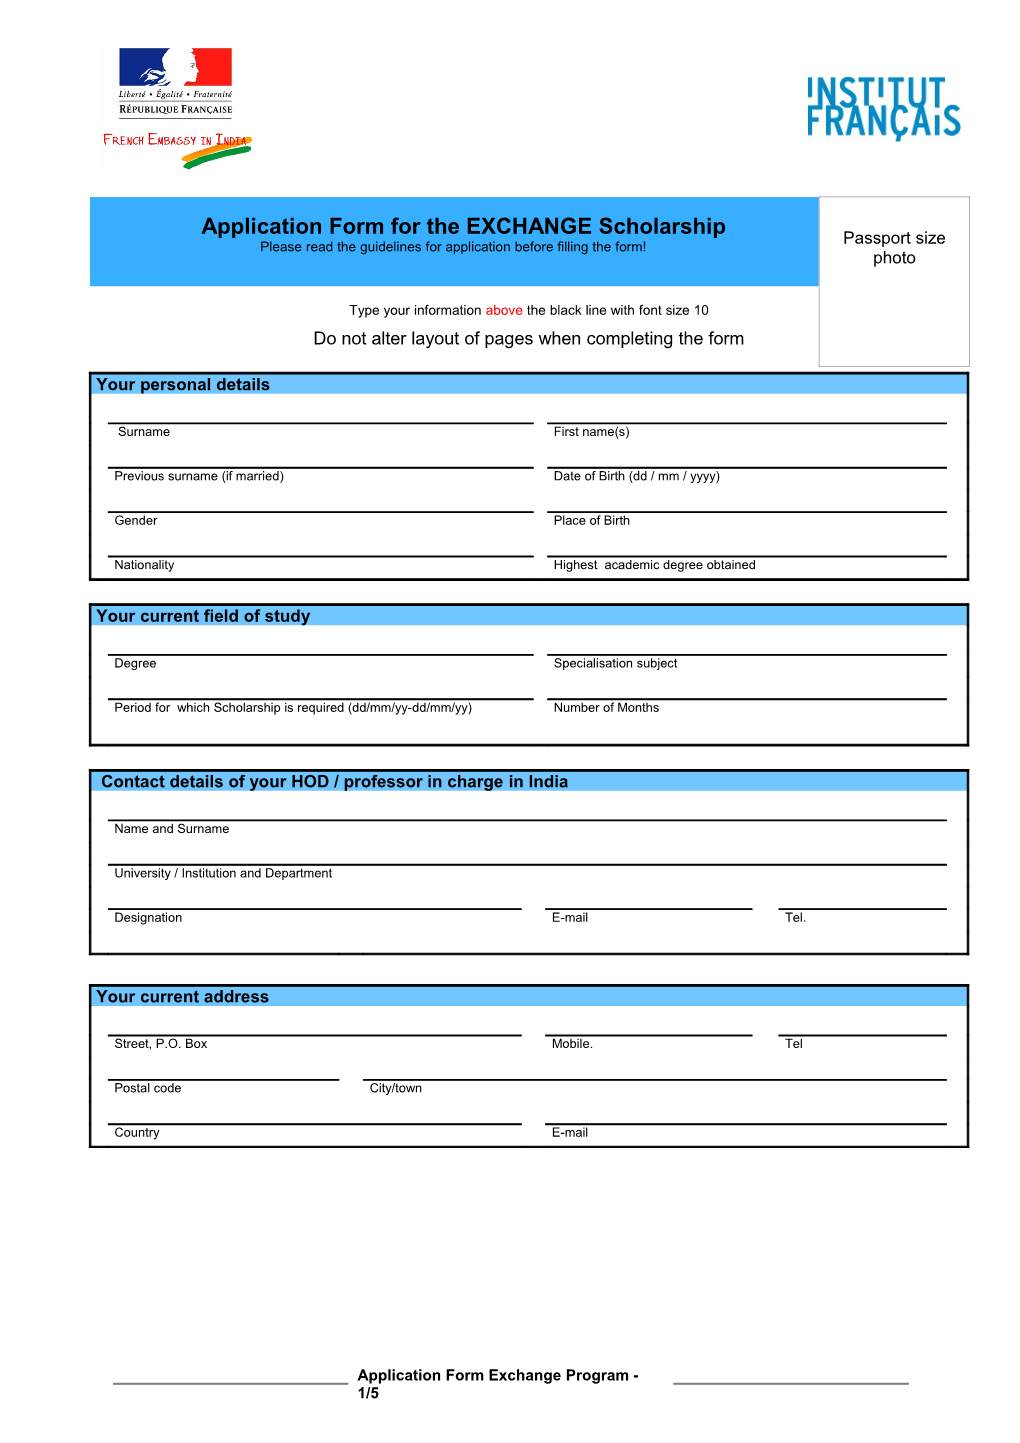 Application Form for the EXCHANGE Scholarship